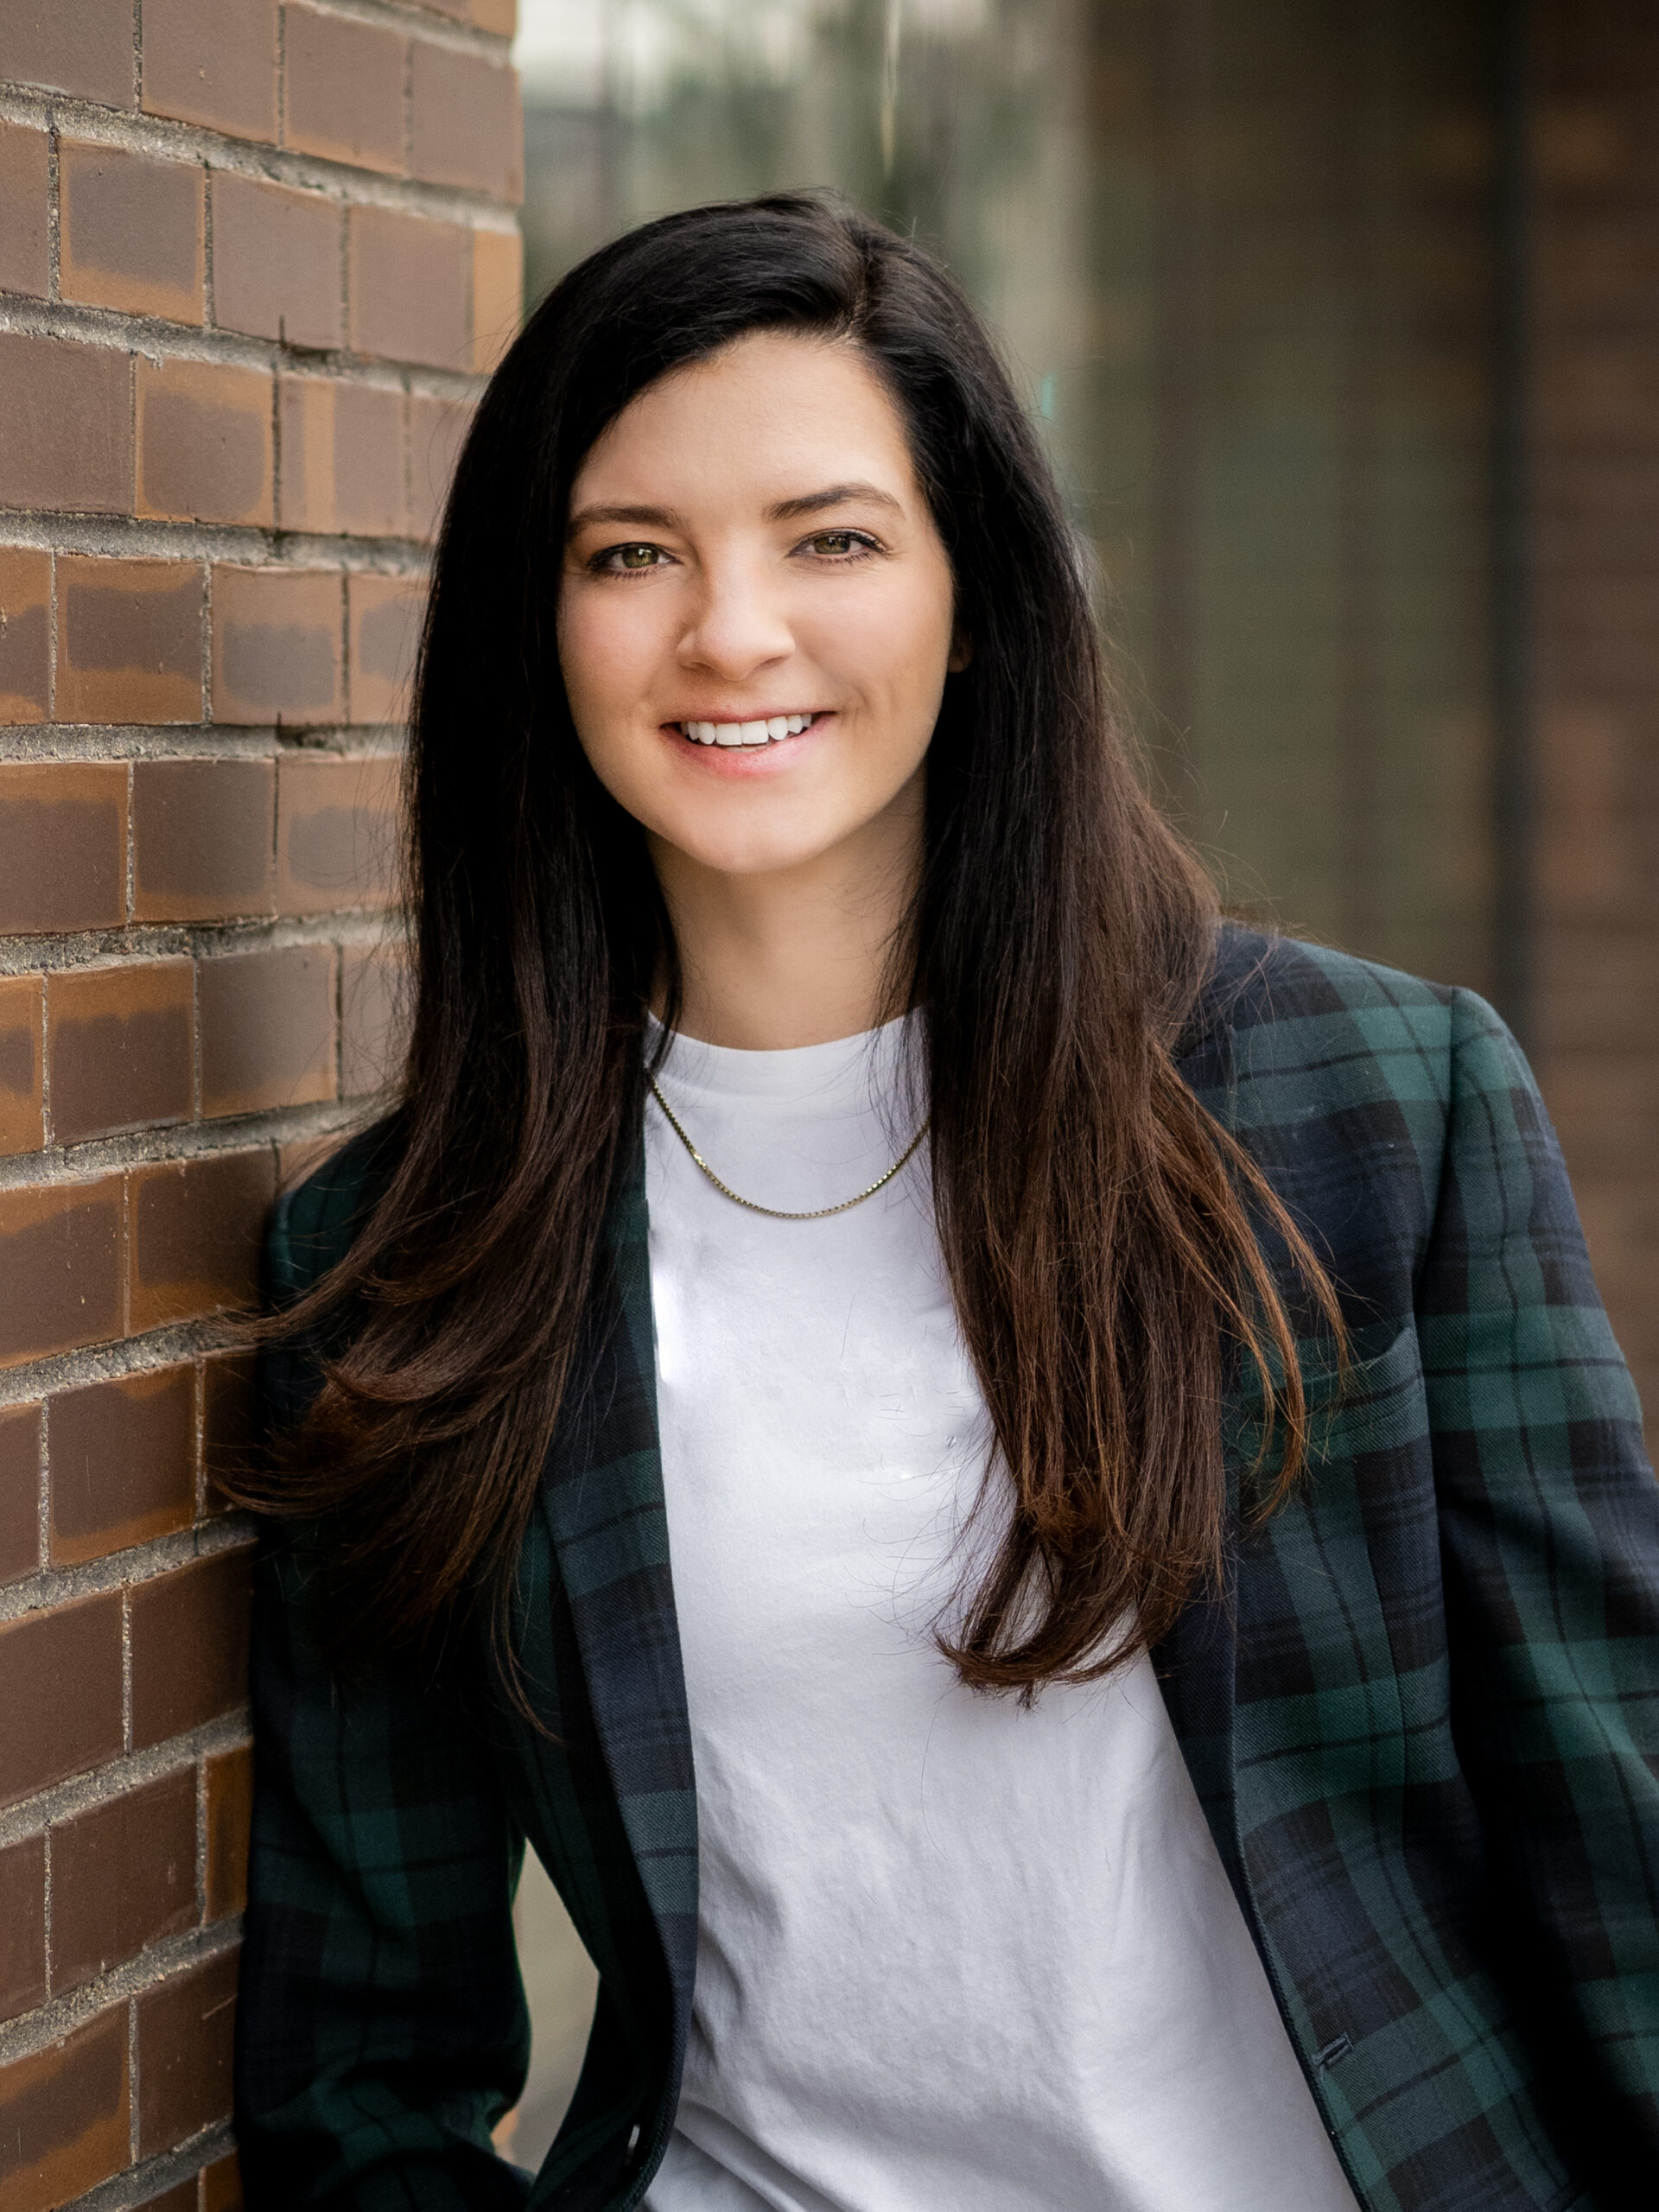 A woman with long dark hair, dressed up in a plaid blazer and white shirt, smiling while standing against a brick wall.